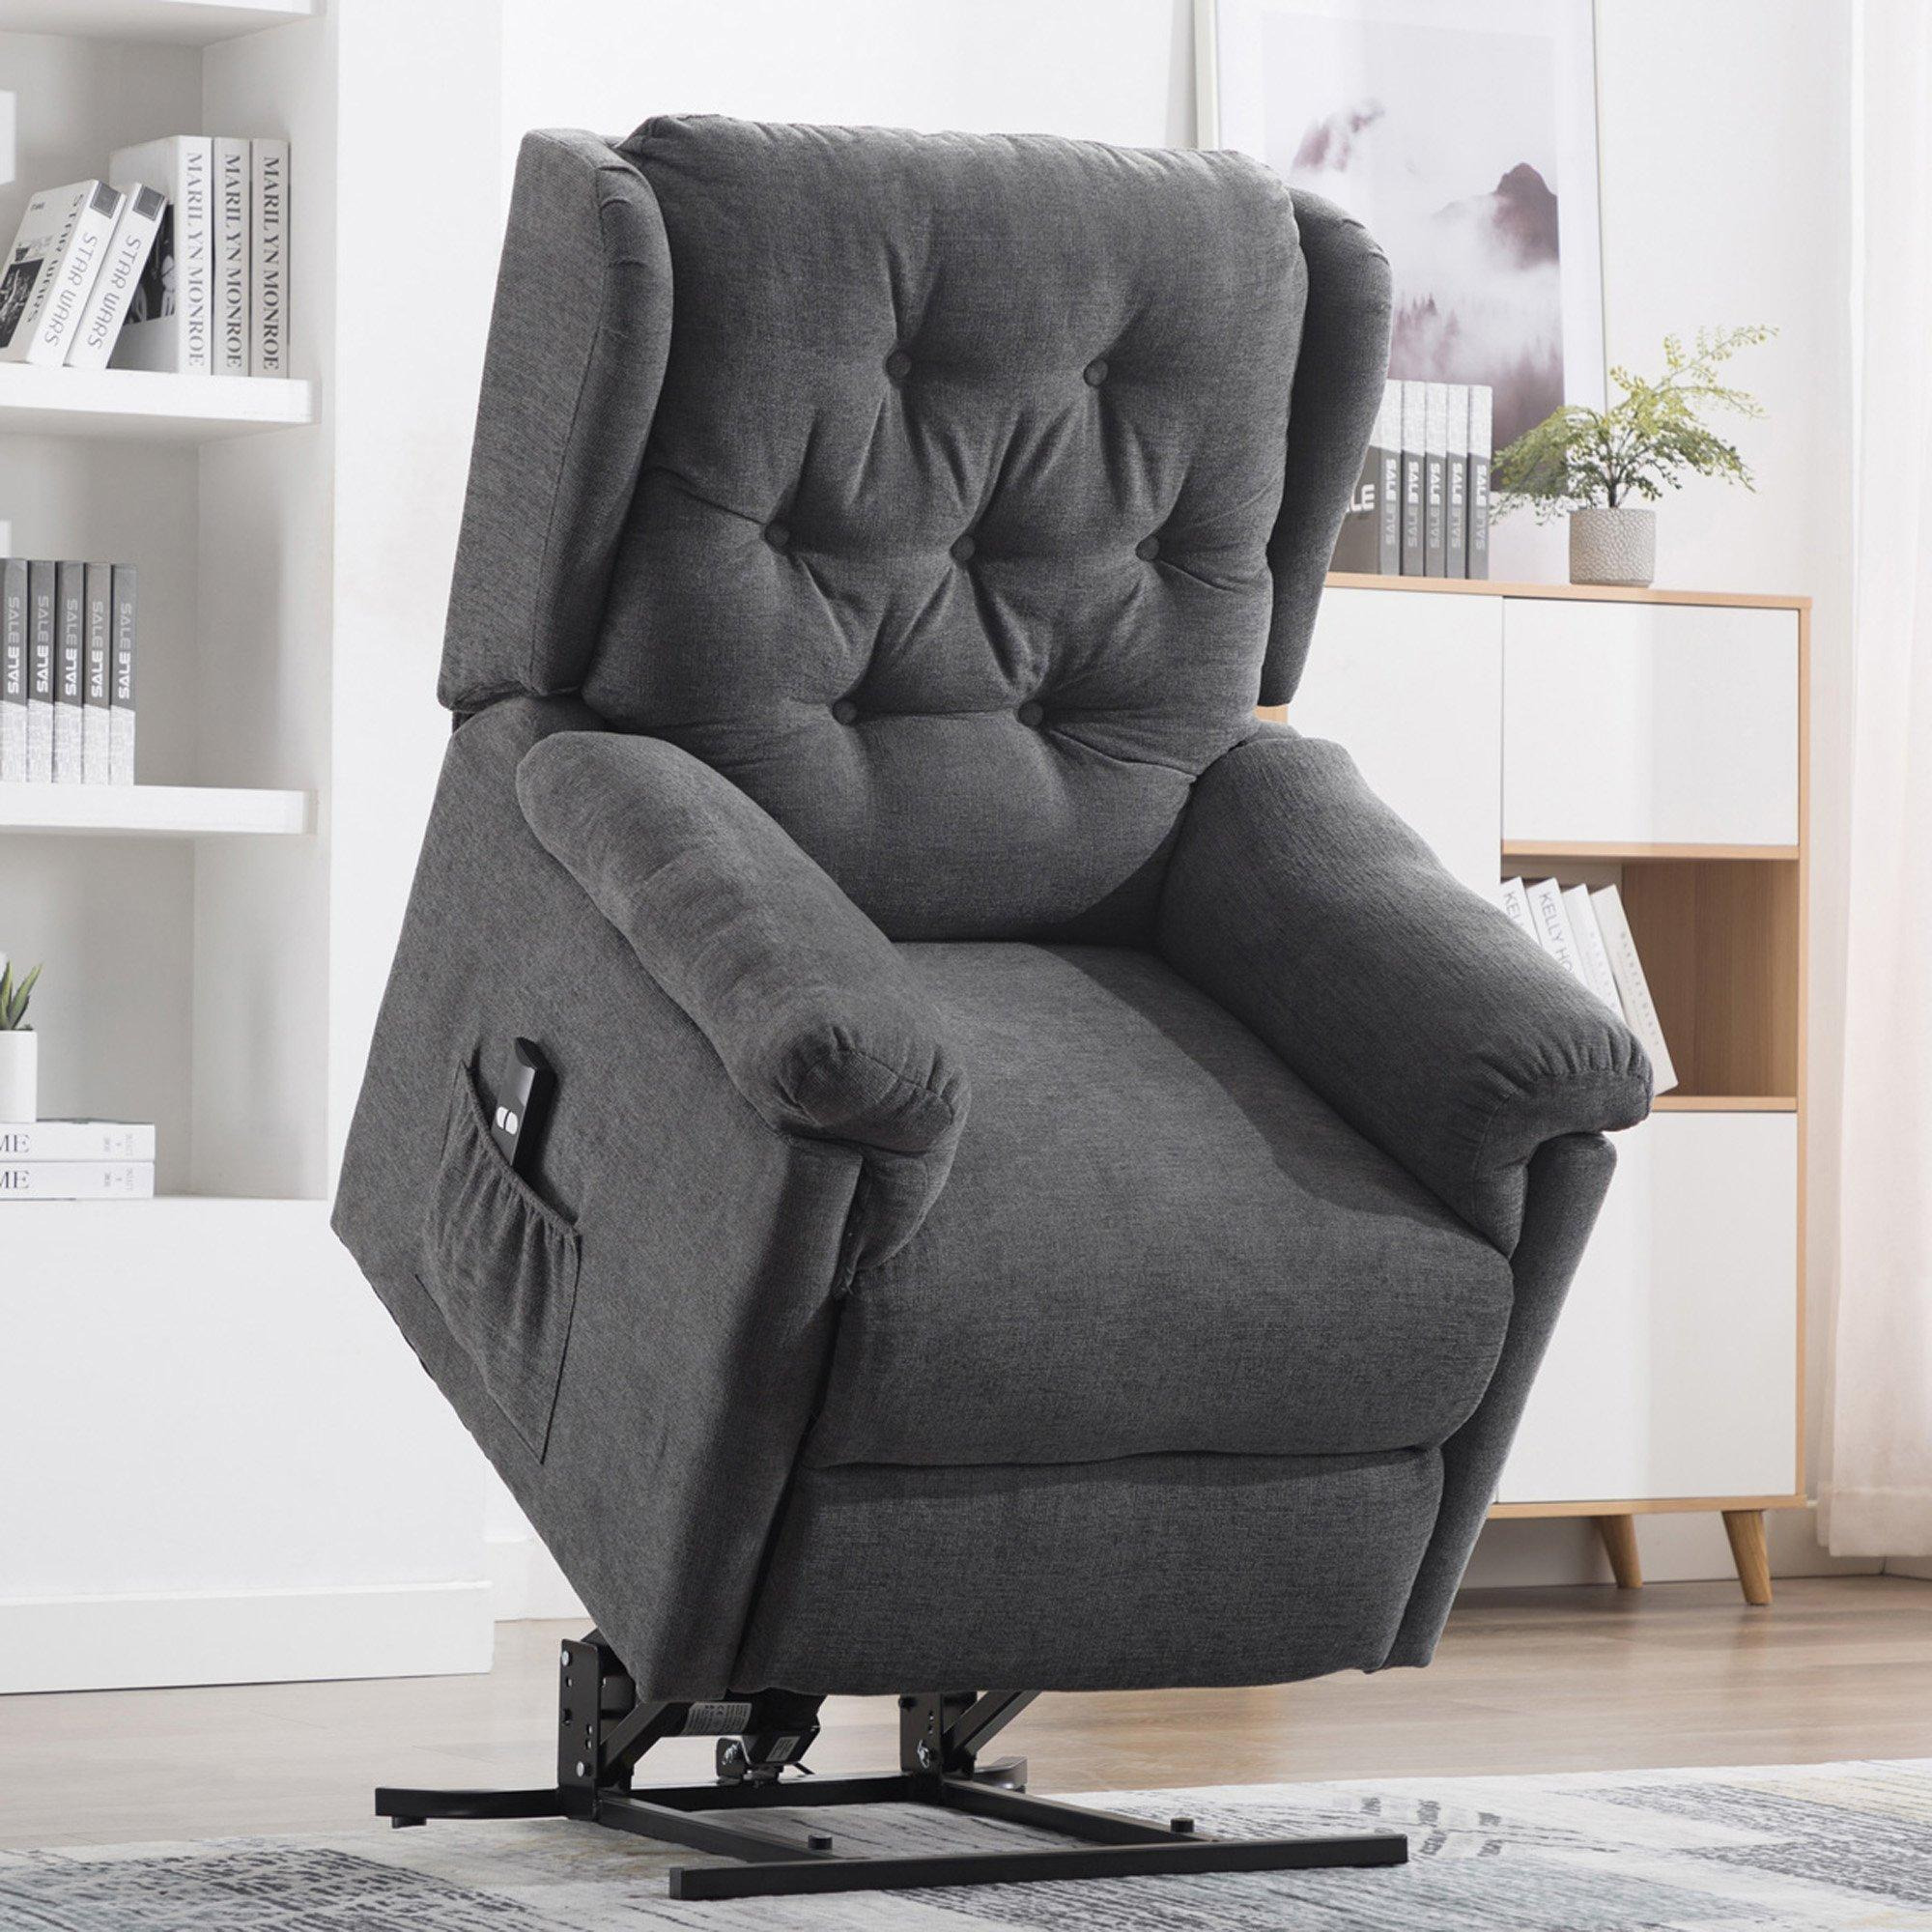 Barnsley Fabric Electric Single Motor Rise Recliner Mobility Armchair - image 1